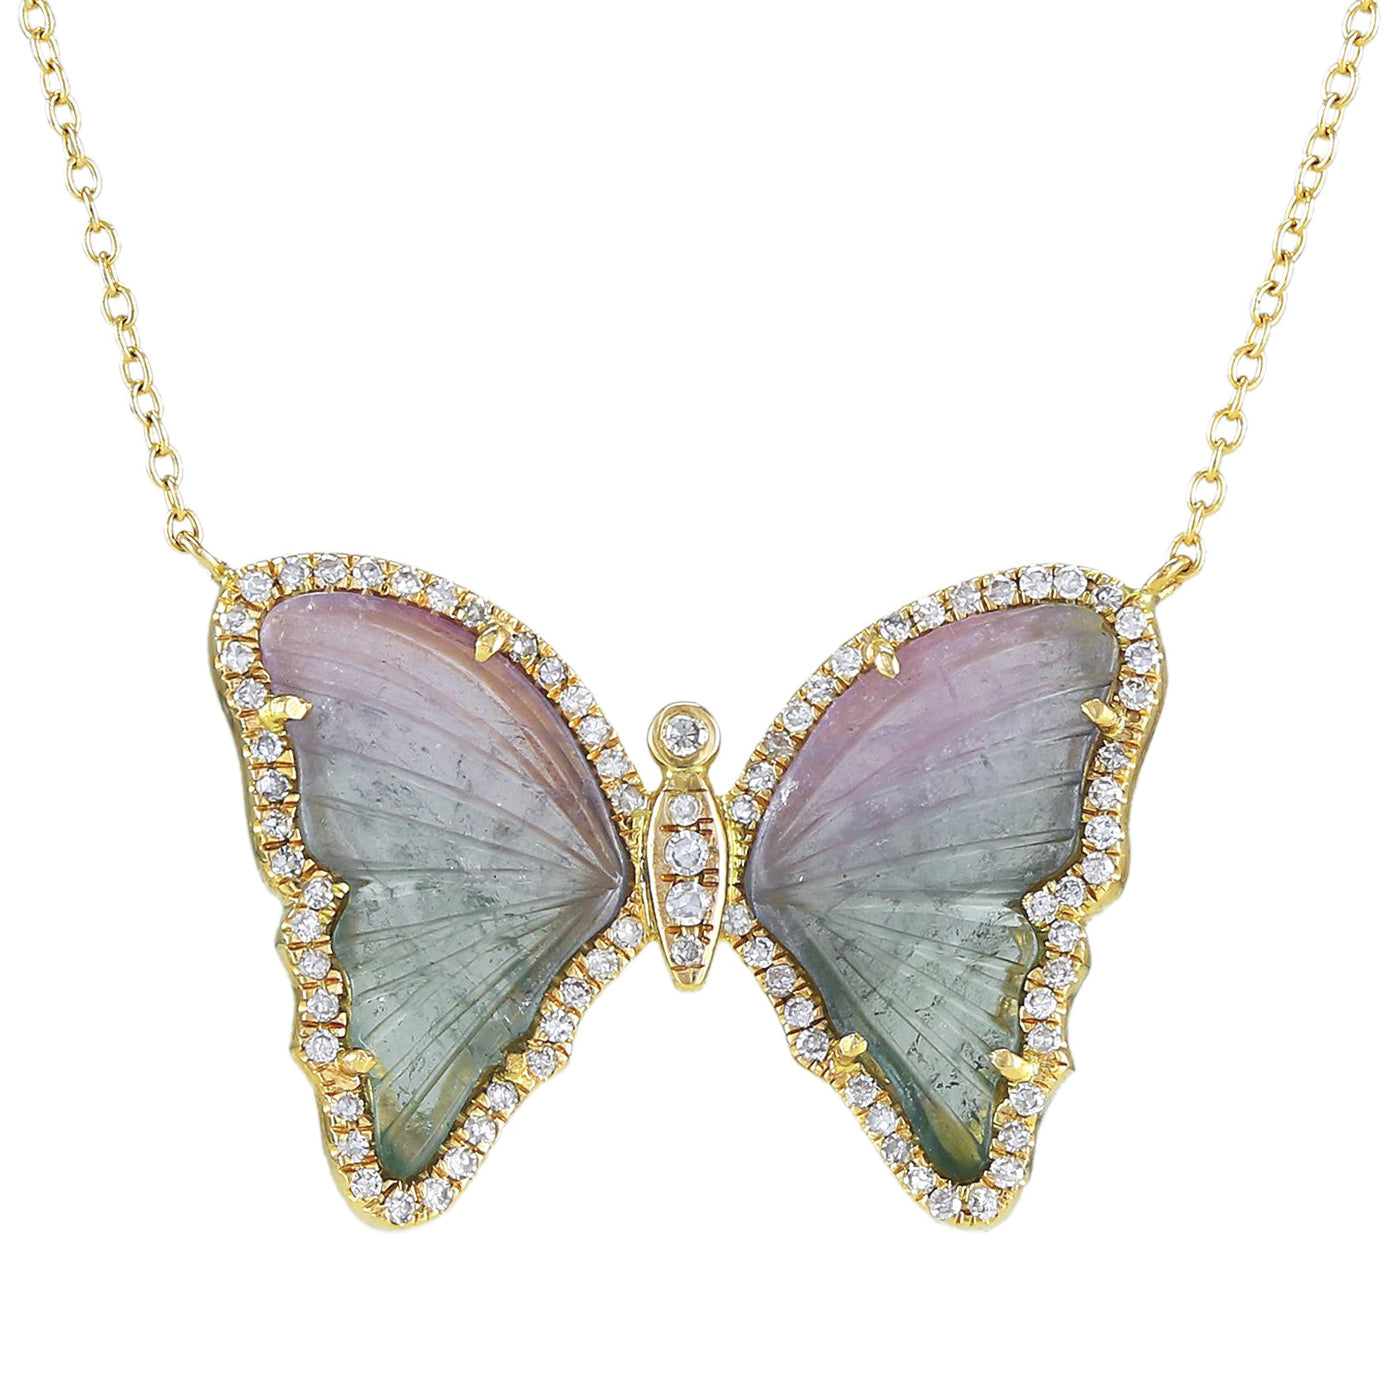 Mauve and Green Tourmaline Butterfly Necklace With Diamonds